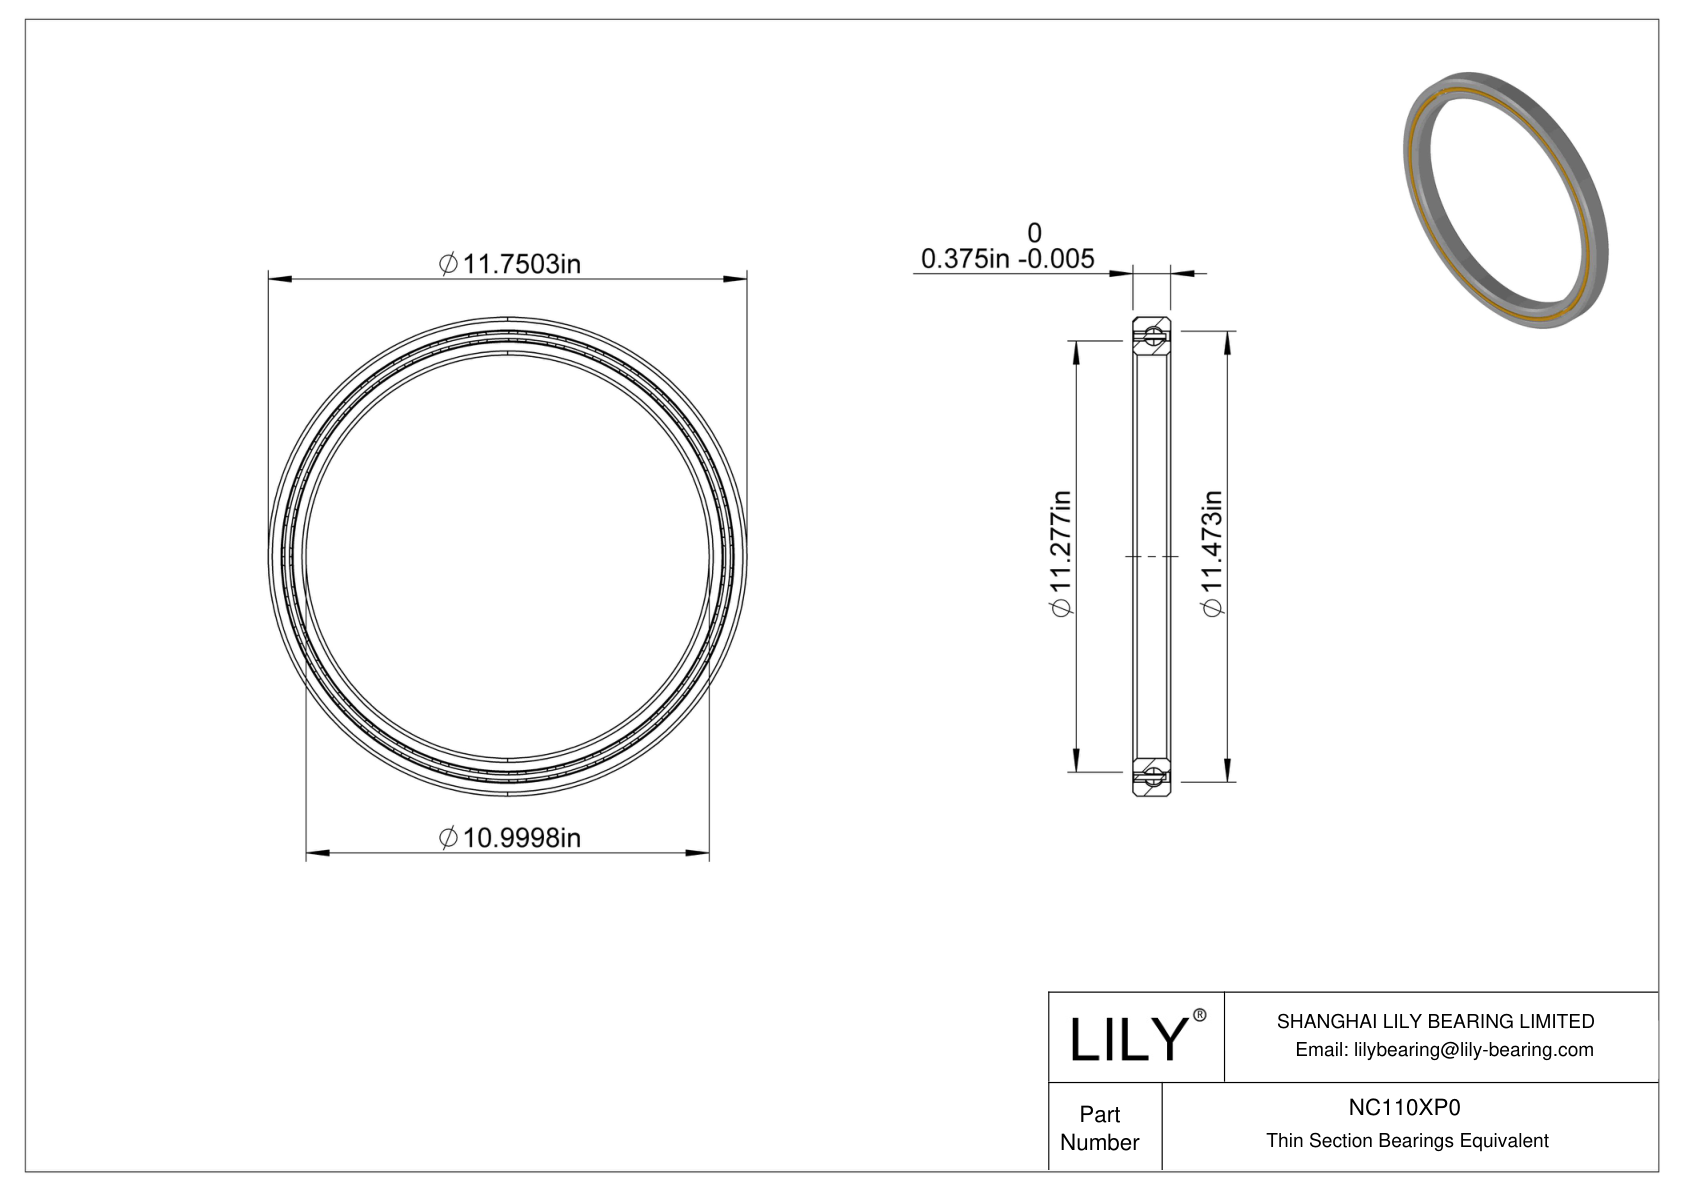 NC110XP0 Constant Section (CS) Bearings cad drawing